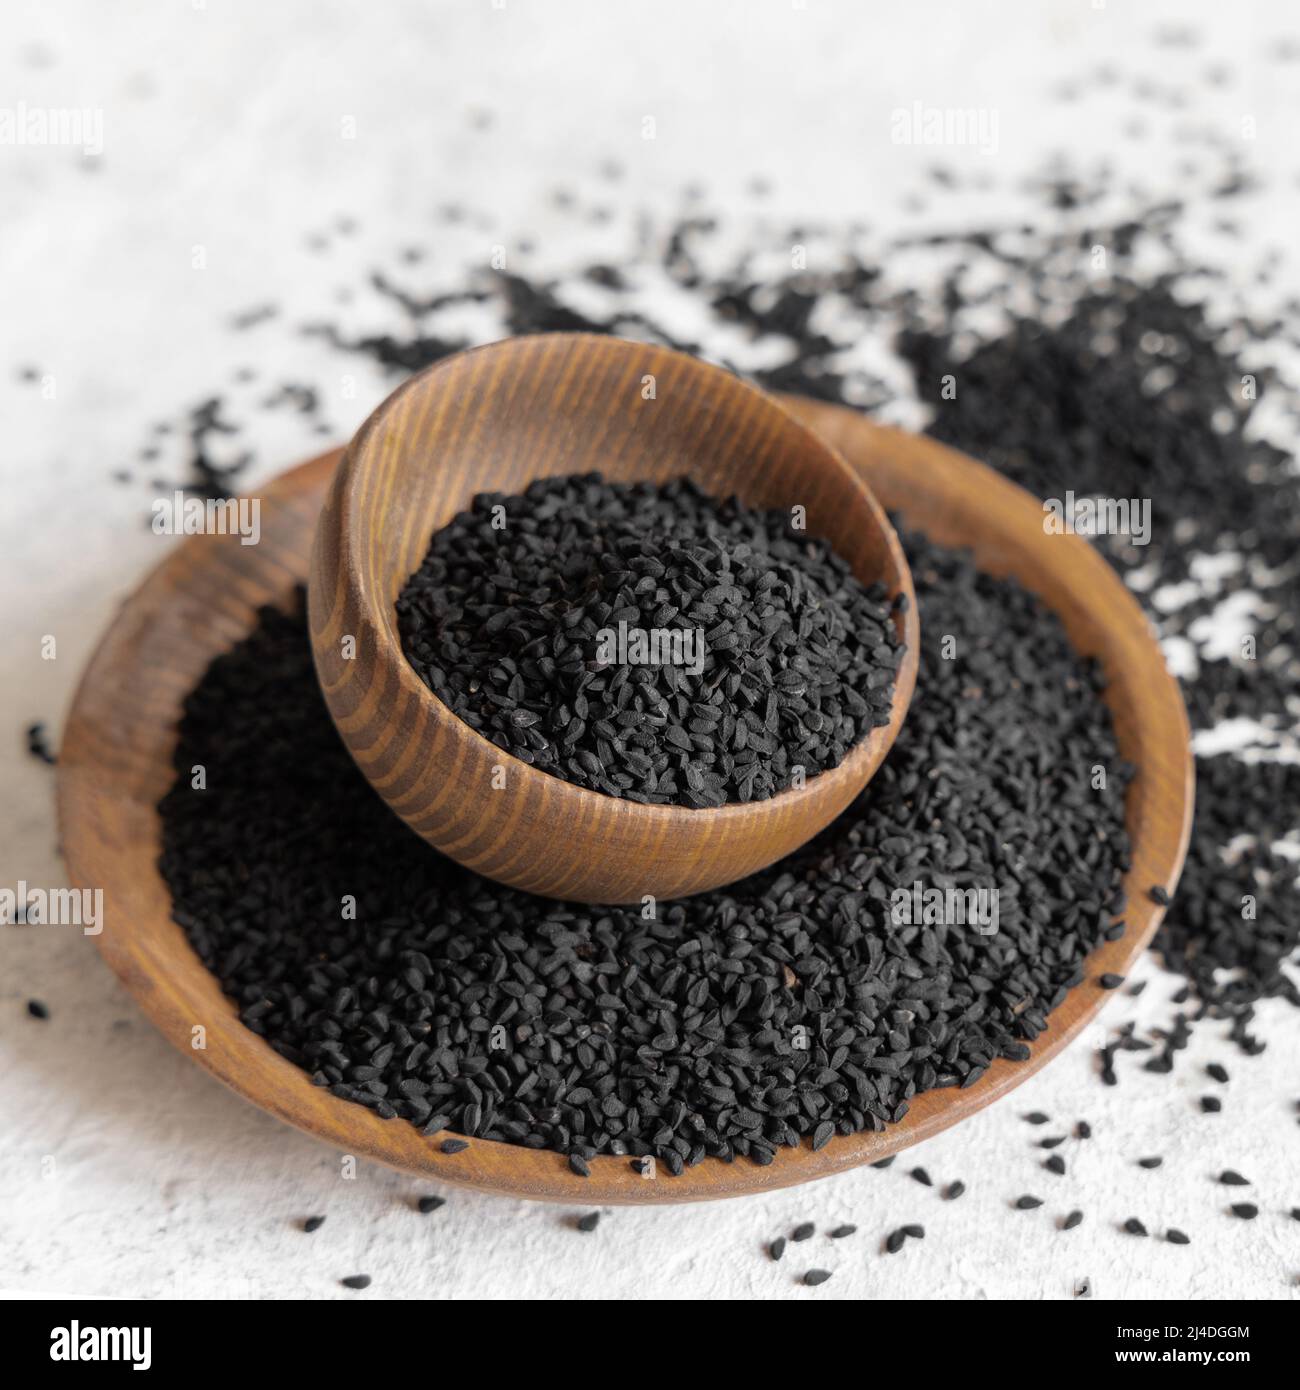 Indian spice Black cumin (nigella sativa or kalonji) seeds in wooden bowls close up. Traditional medicine, healthy and vegetarian food concept. Stock Photo